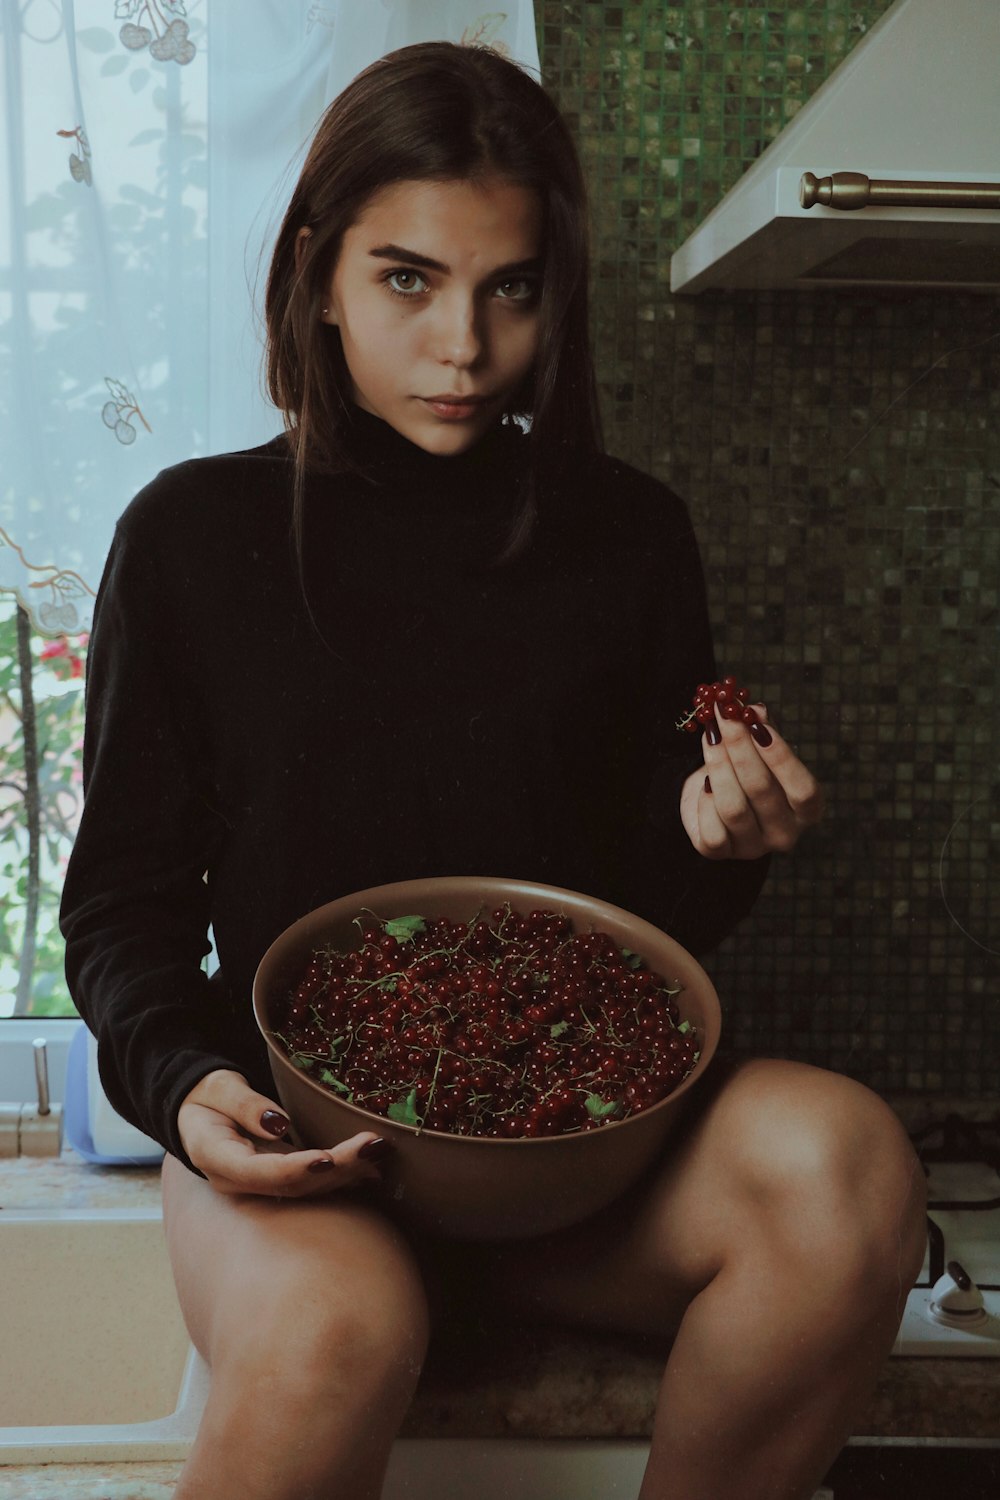 woman wearing long-sleeved shirt holding berries and container while sitting